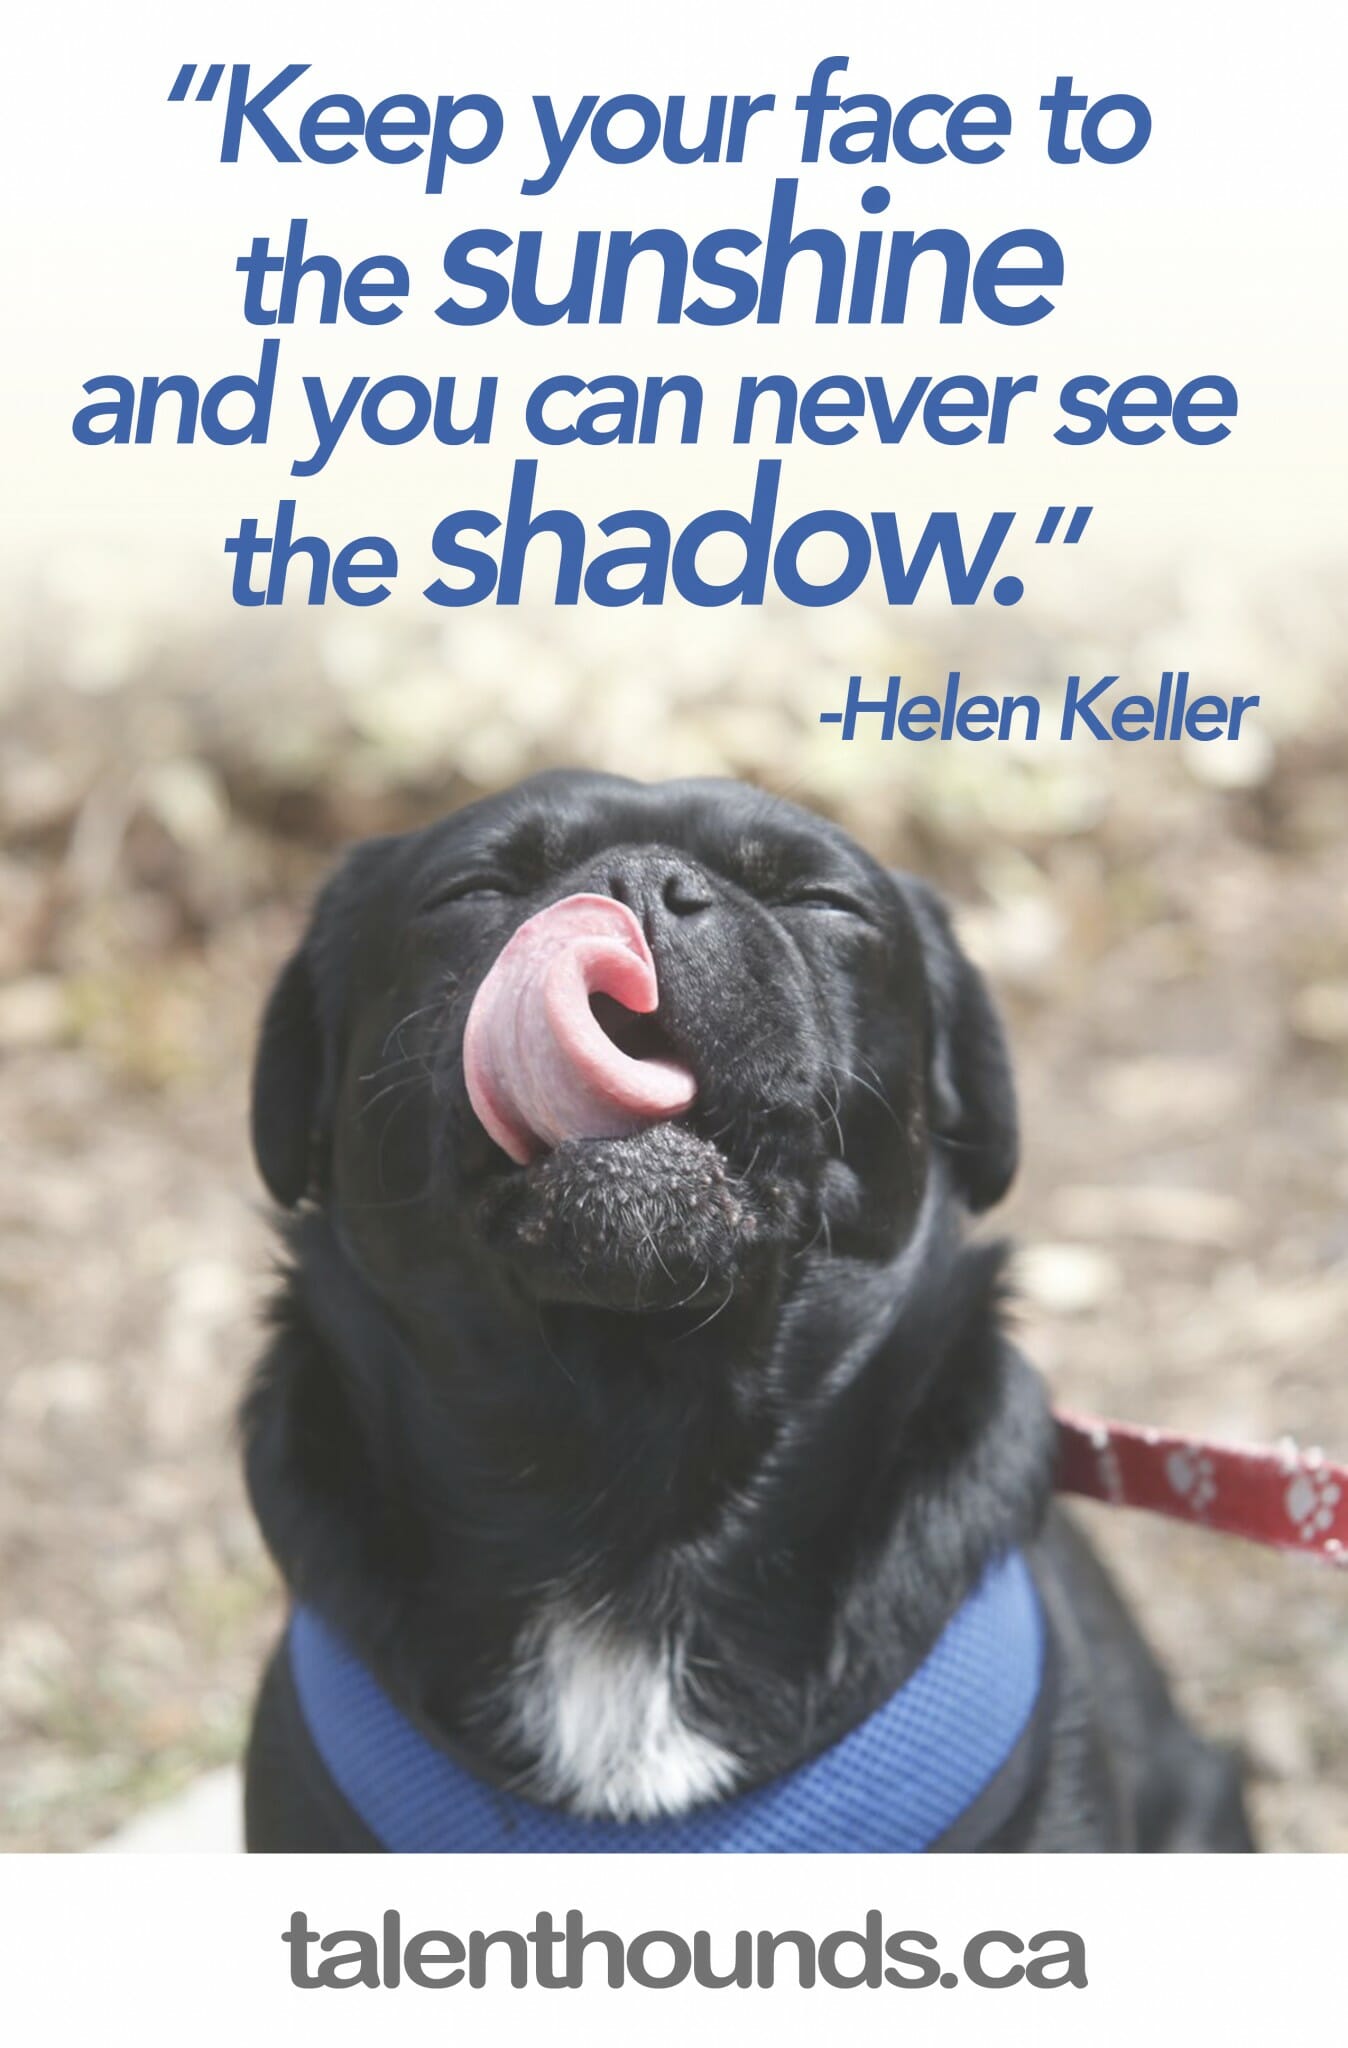 Enjoy this Happiness Quote featuring Kilo the Pug "Keep your face to the sunshine and you can never see the shadow"